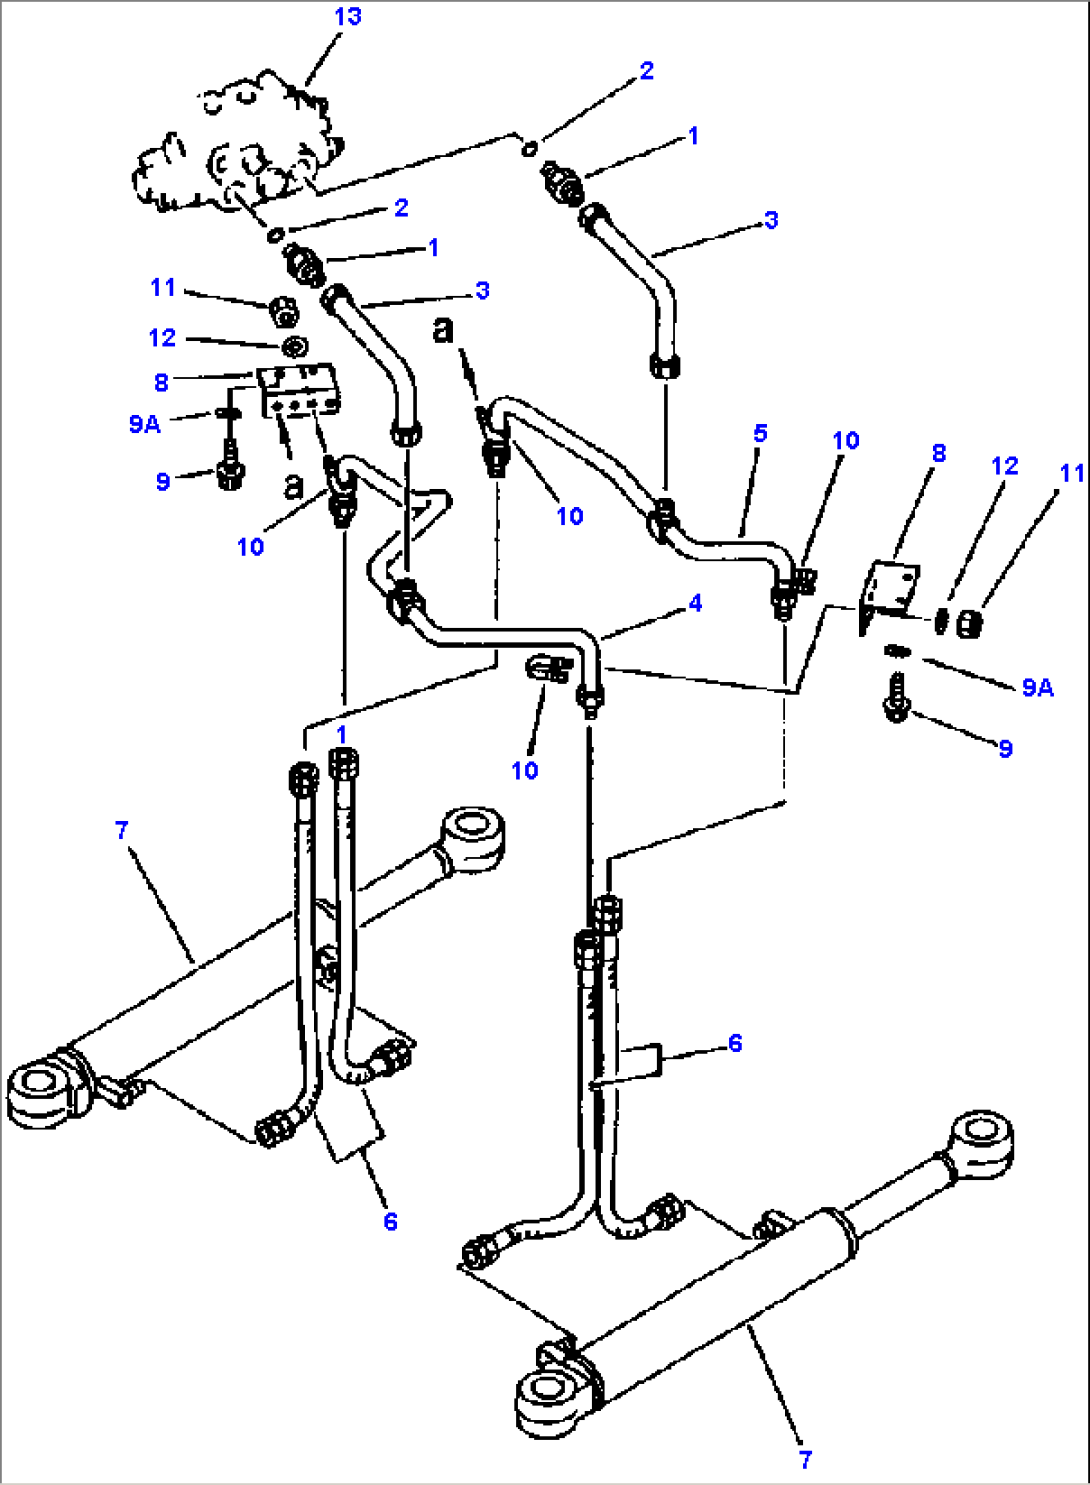 FIG NO. 4302 DEMAND VALVE TO CYLINDER STEERING PIPING